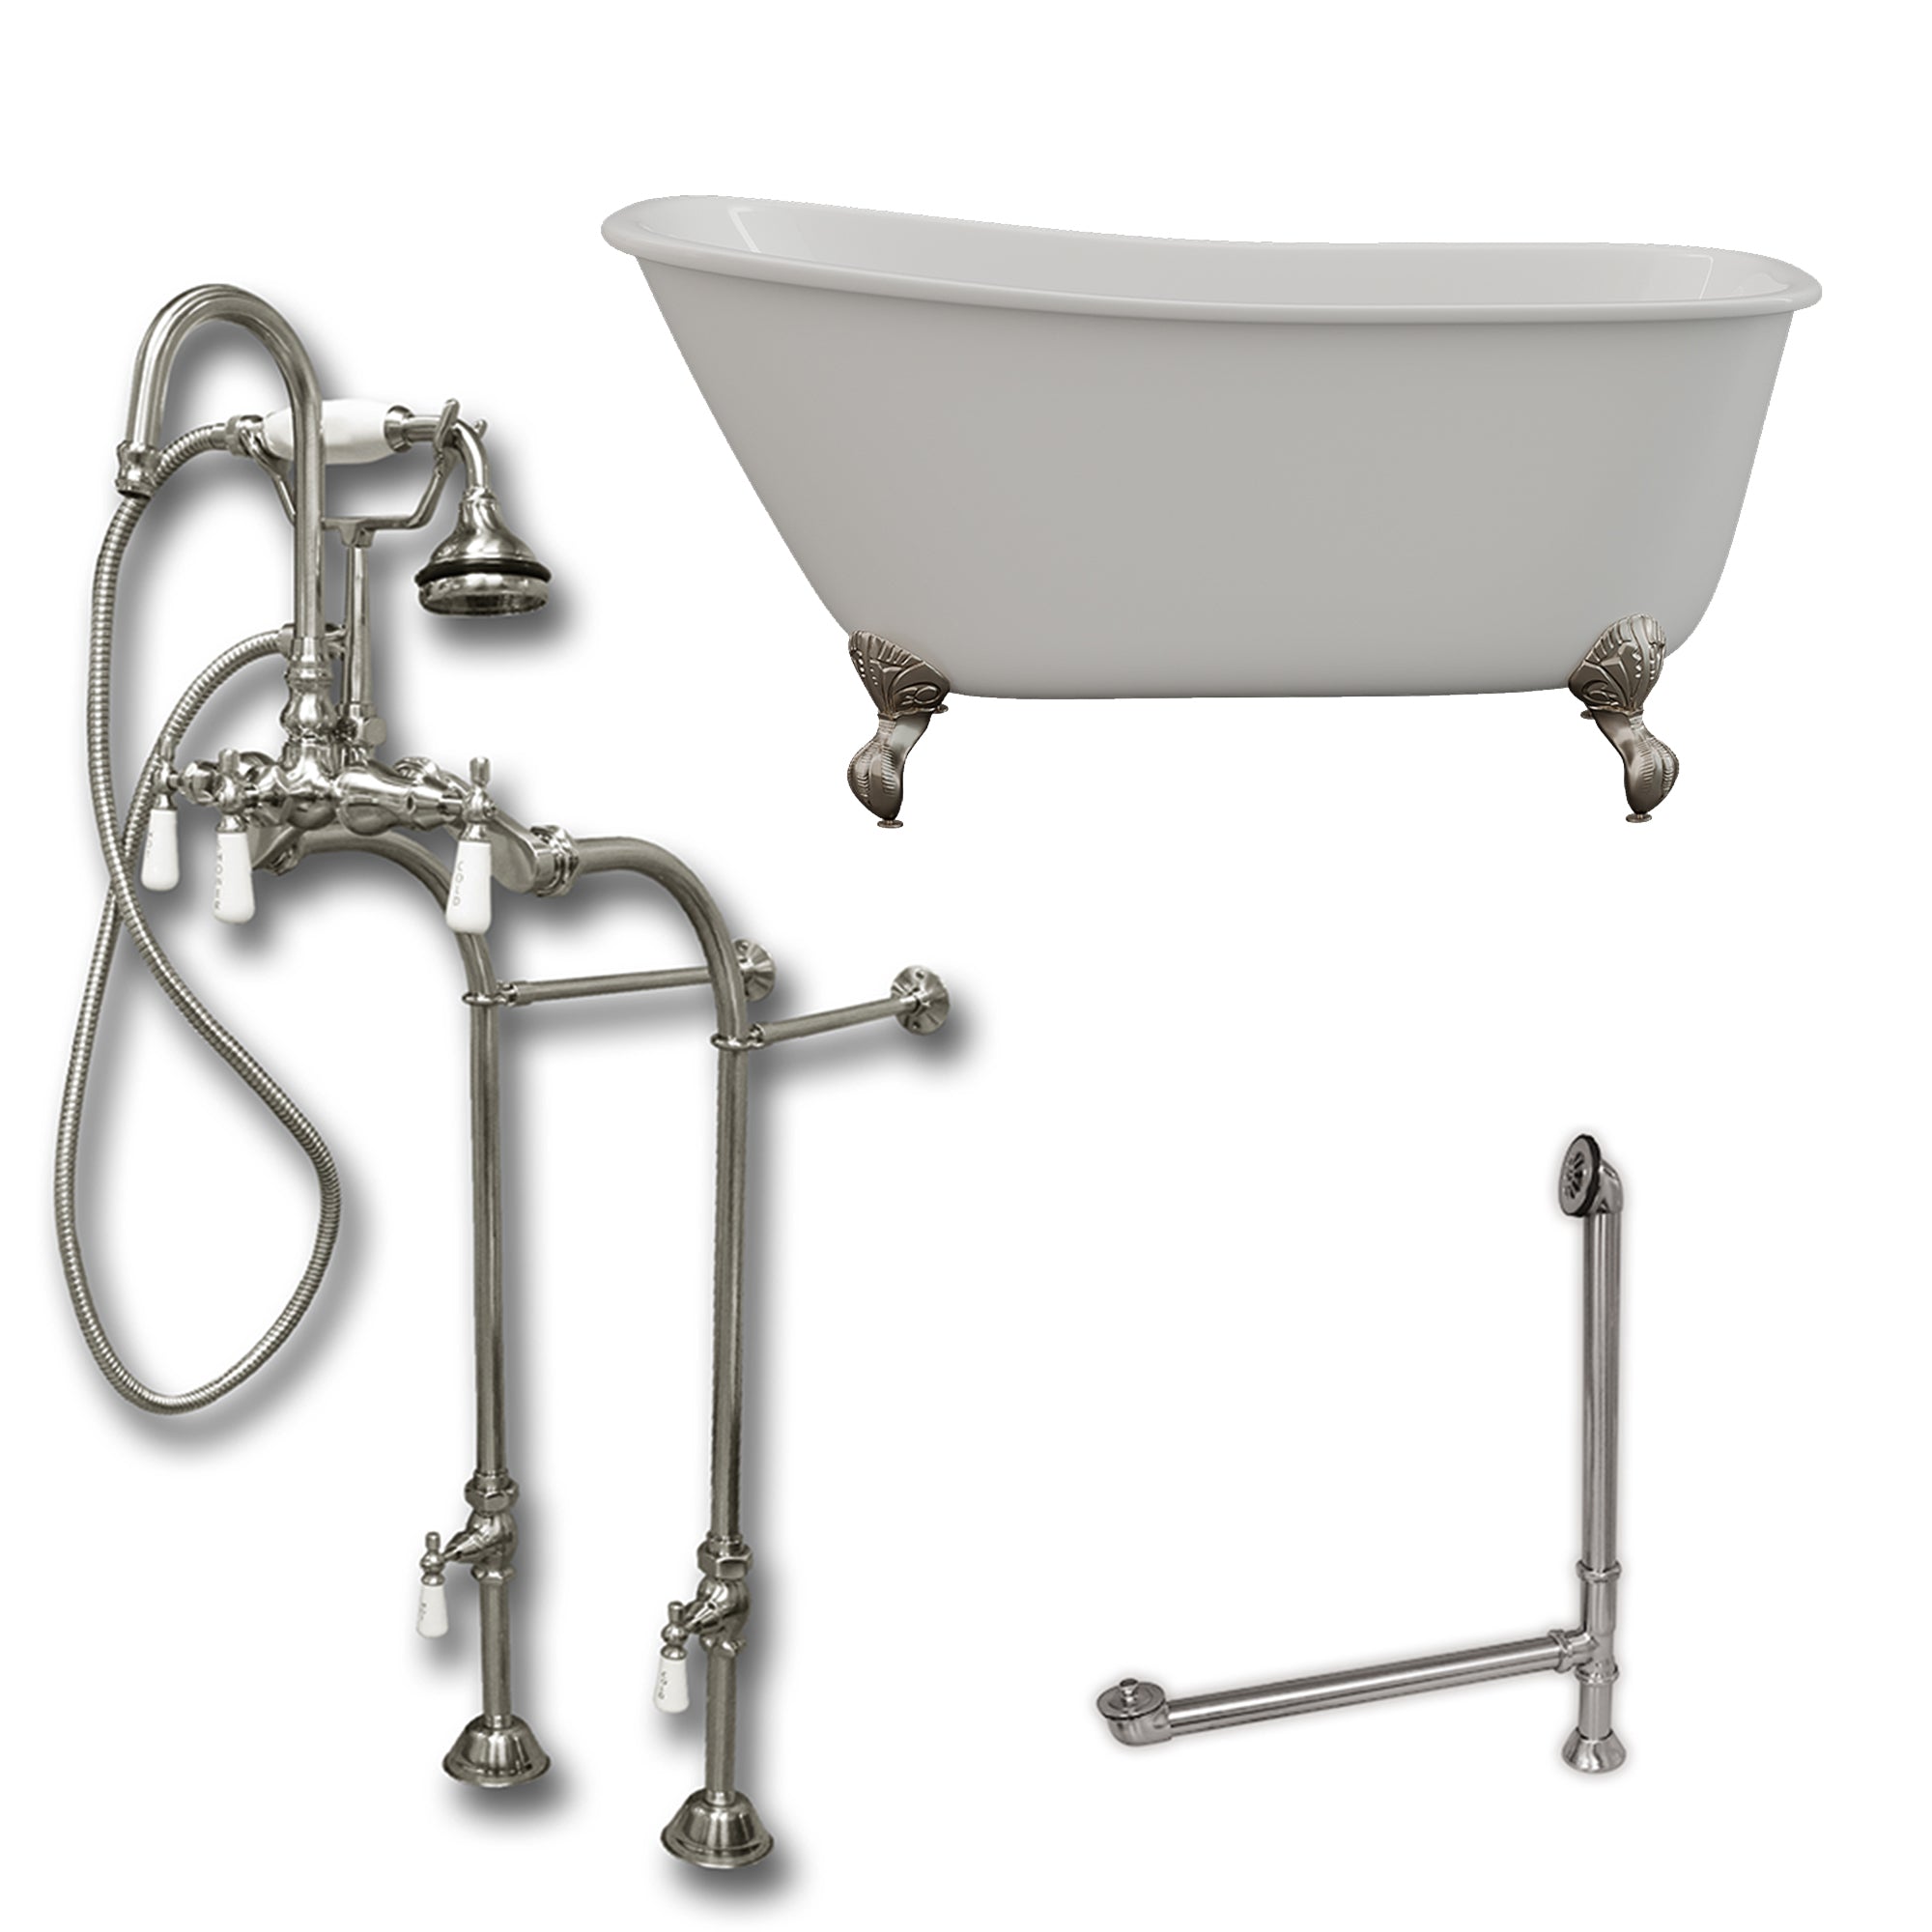 Cambridge Plumbing 54-Inch Swedish Slipper Cast Iron Clawfoot Tub (Porcelain enamel interior and white paint exterior) with Freestanding Plumbing Package (Brushed Nickel) SWED54-398684-PKG-NH - Vital Hydrotherapy